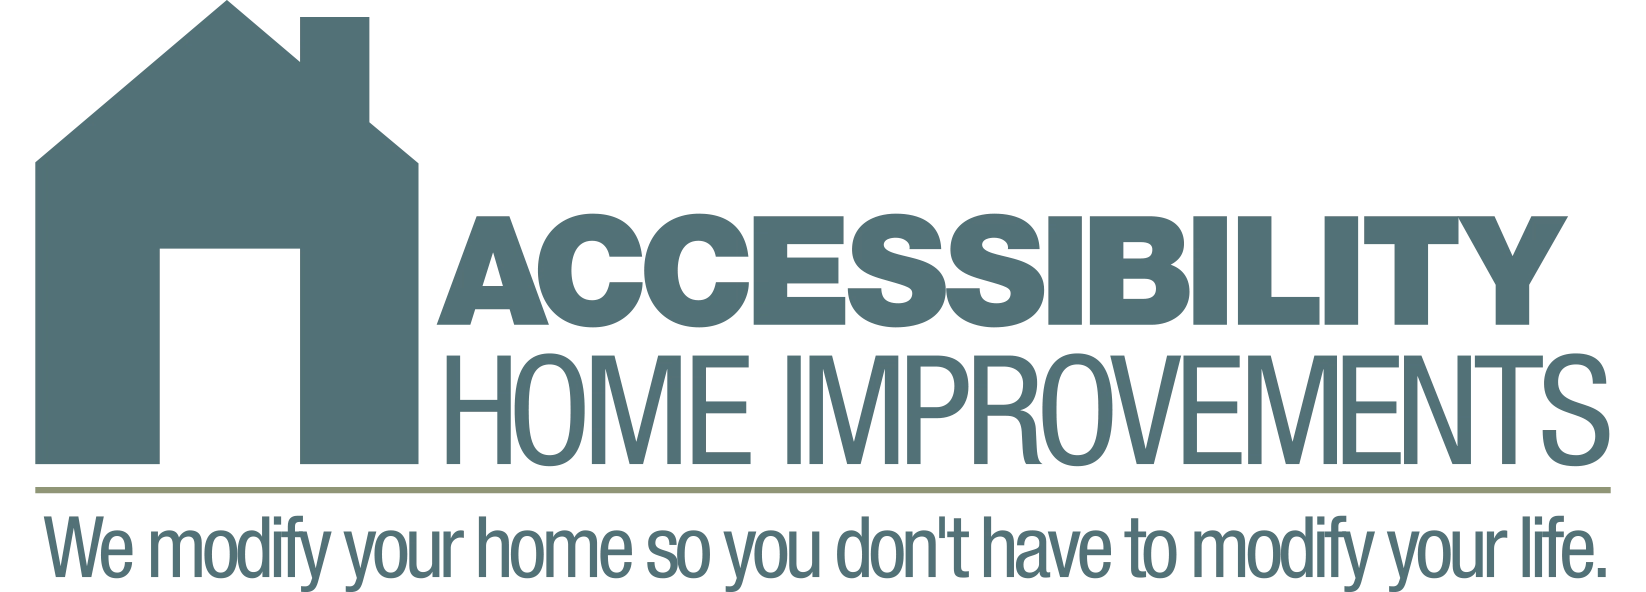 Accessibility Home Improvements Logo